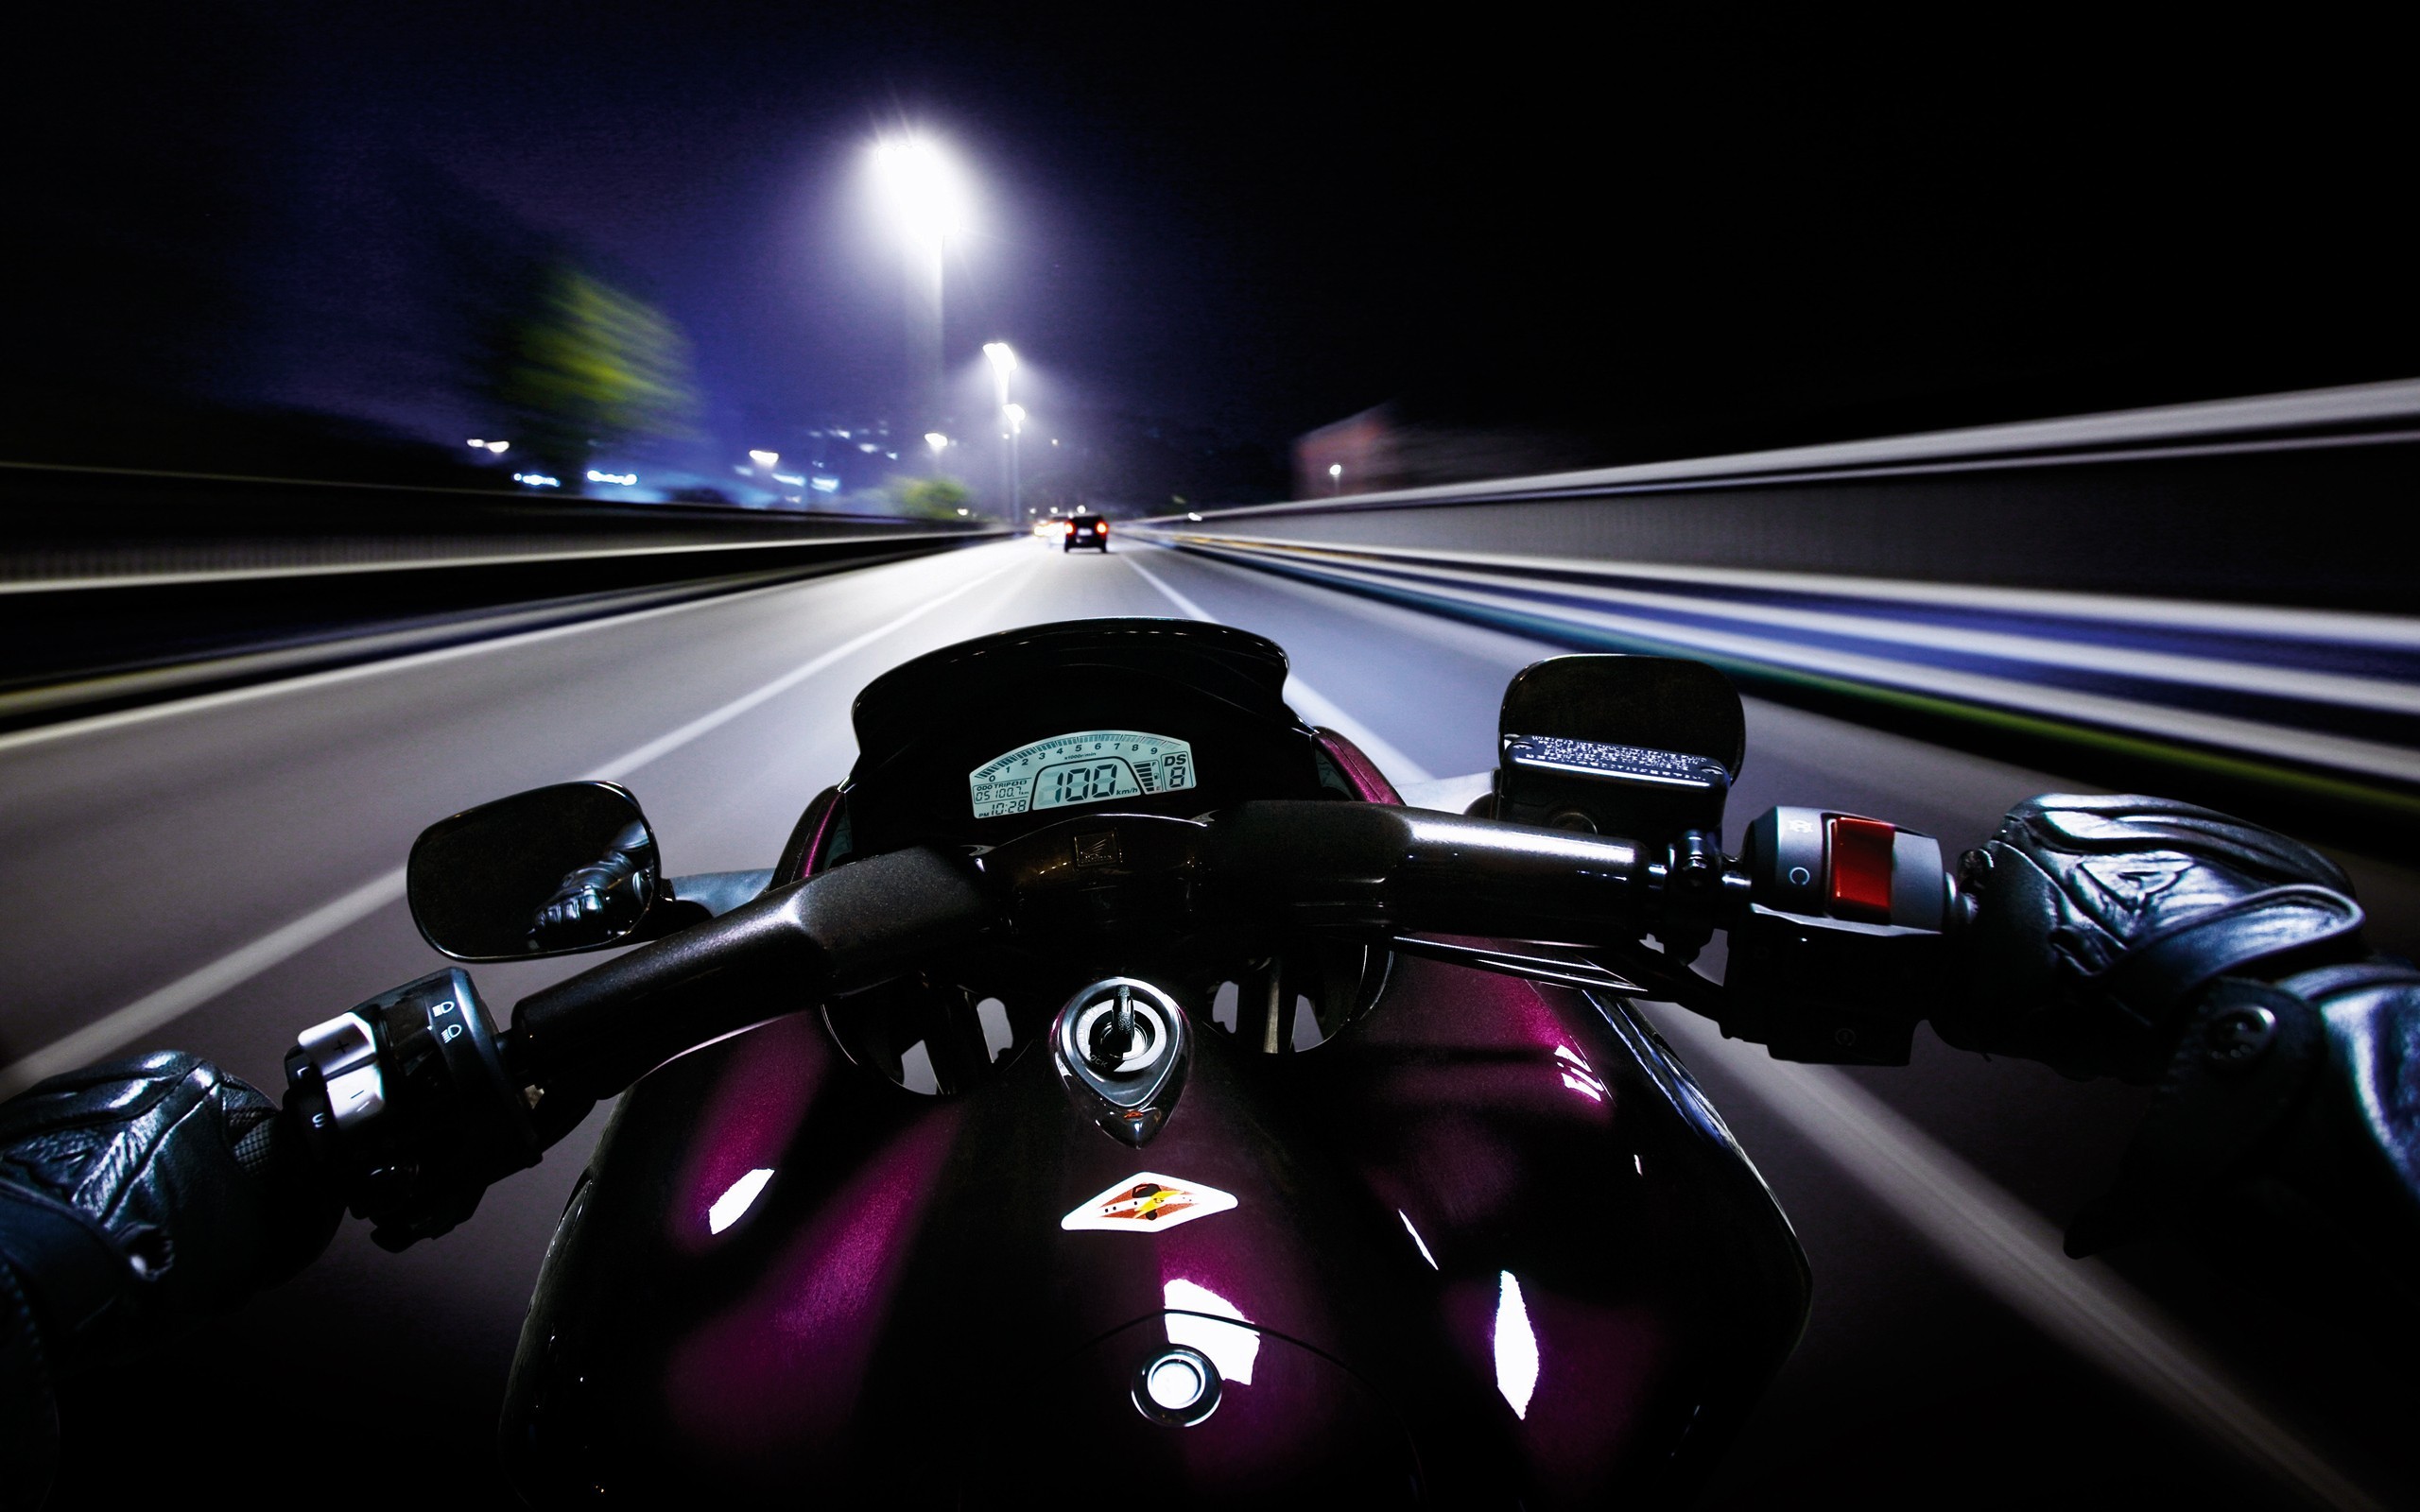 Motorcycle Night Speedometer Point Of View 2560x1600